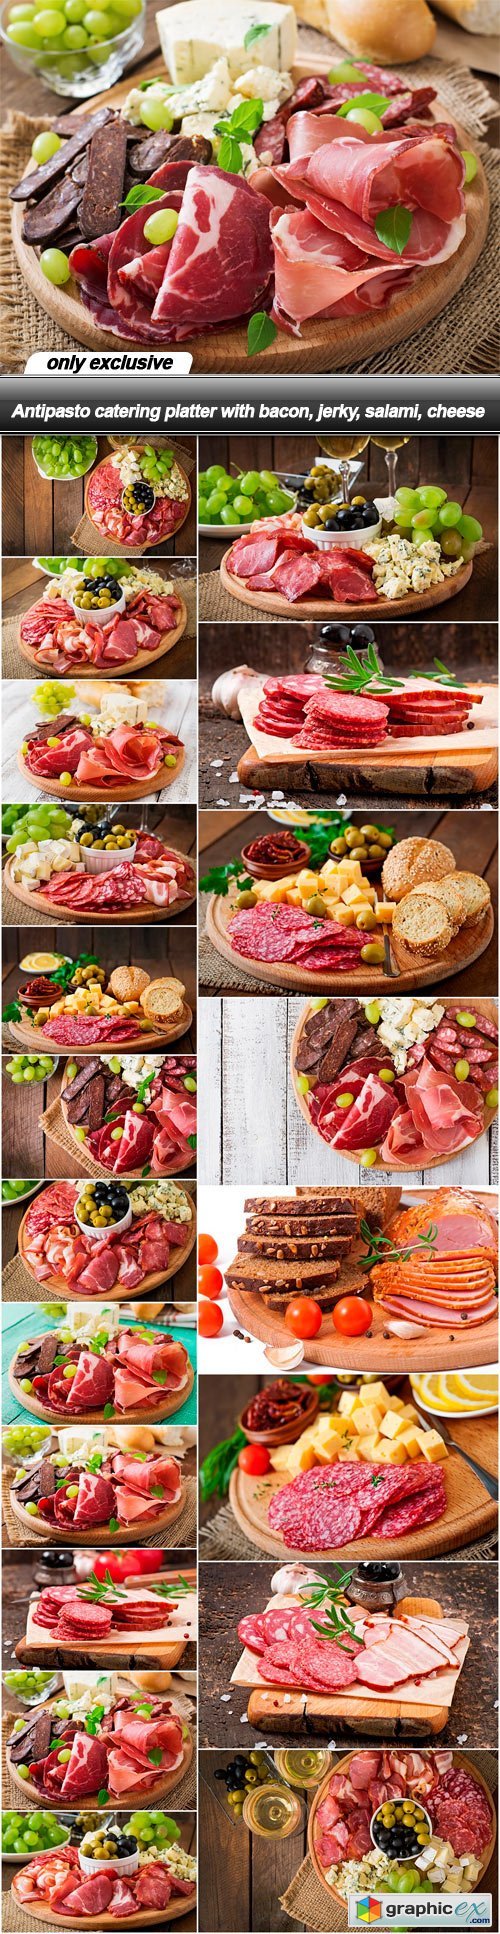 Antipasto catering platter with bacon, jerky, salami, cheese - 20 UHQ JPEG